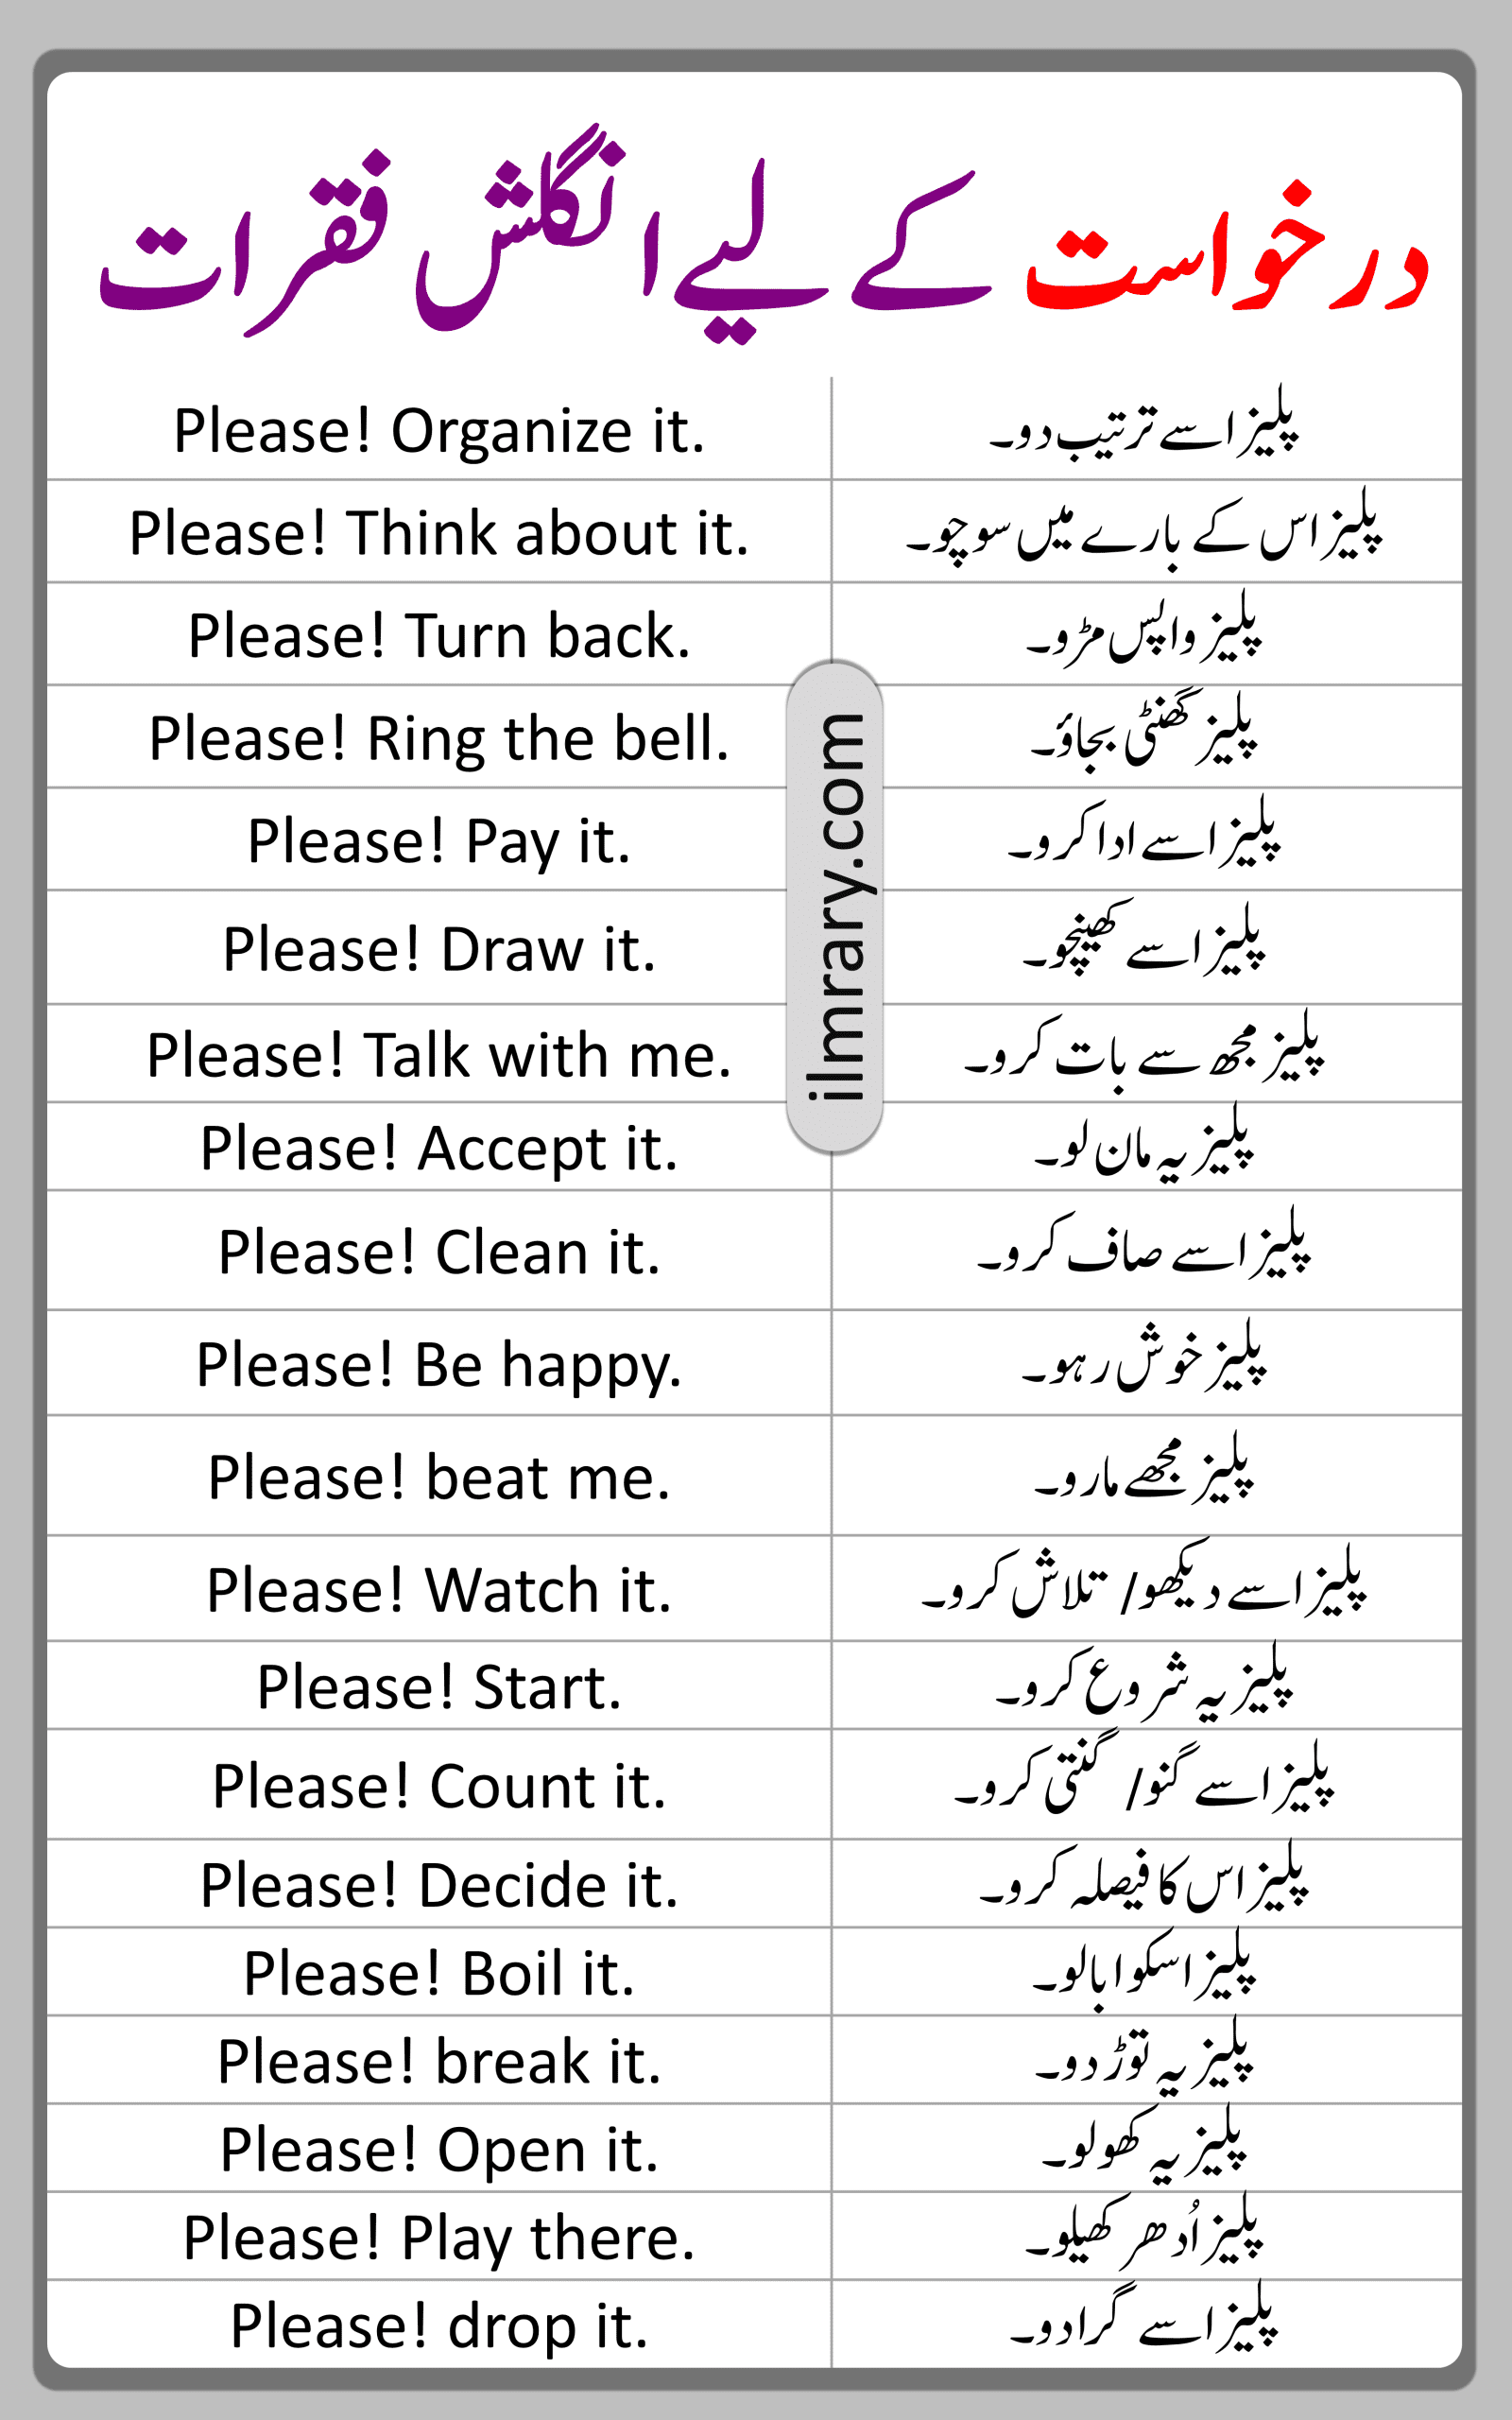 100+ English Sentences for Request with Urdu Translation